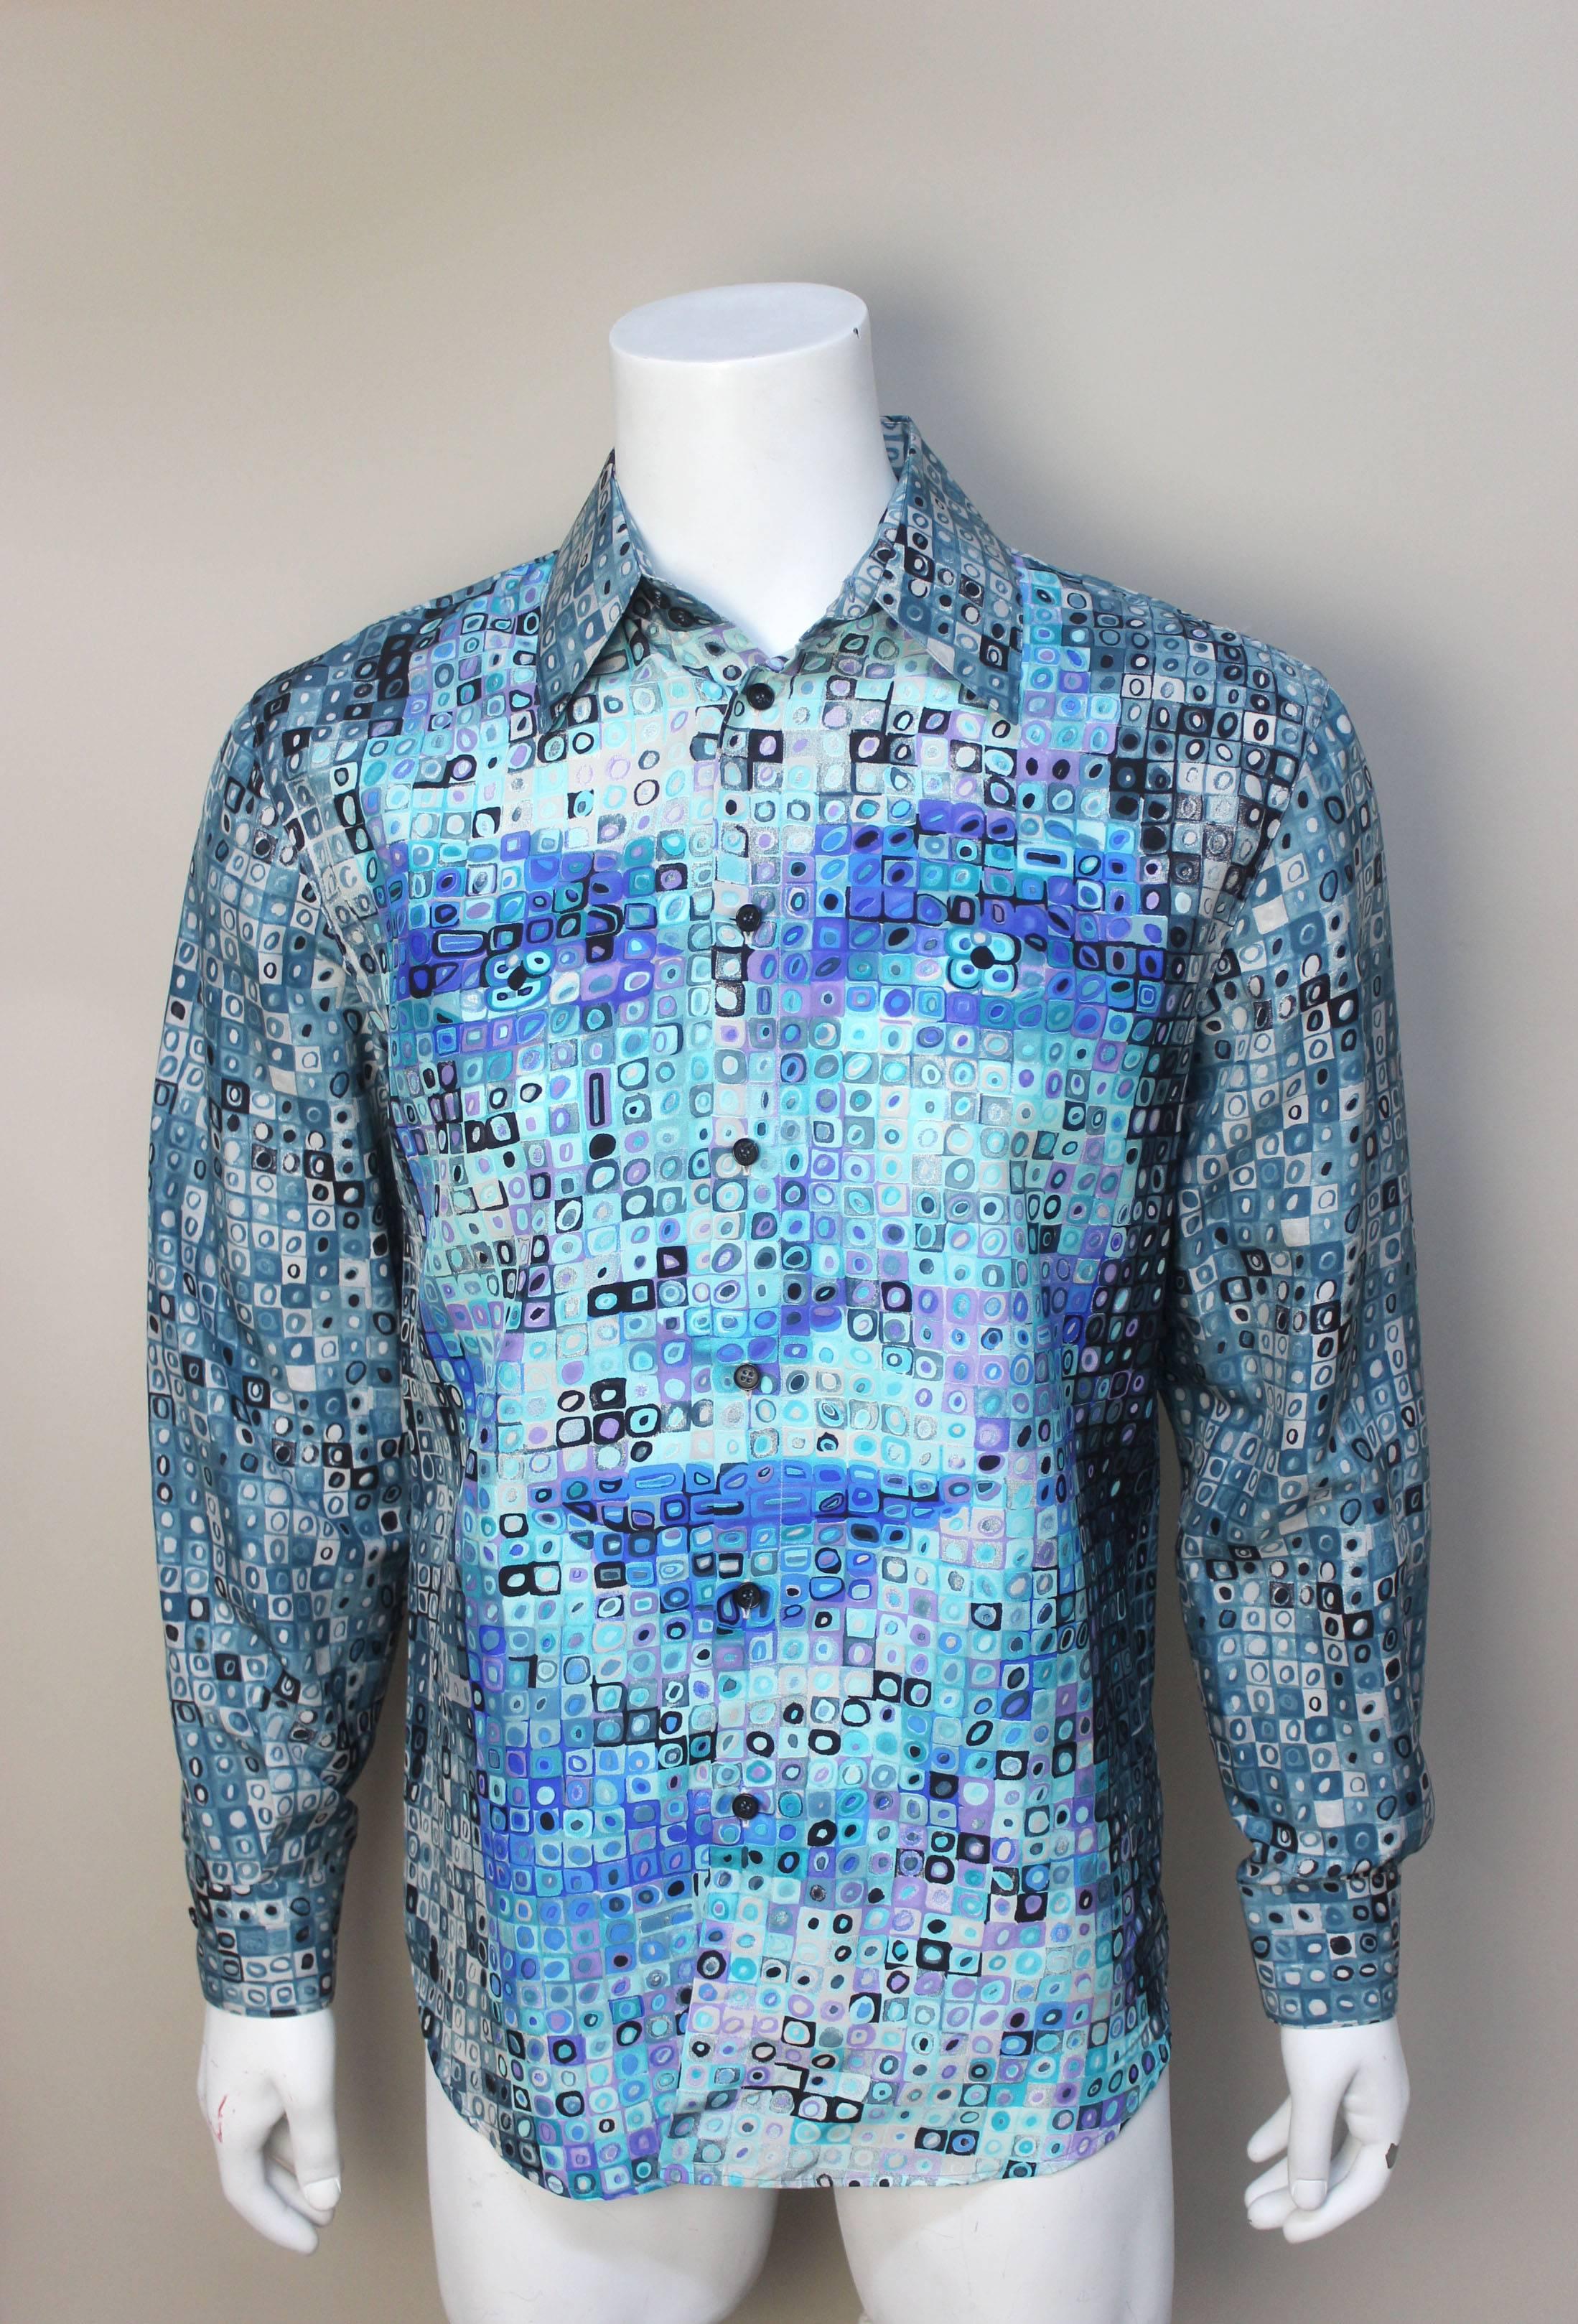 This Versace Couture shirt is a rare find. When viewed up close the pattern is a geometric silk print in blues and greens, but when viewed from afar the face of a beautiful woman (perhaps Donatella) clearly appears. It's an ingenious optical